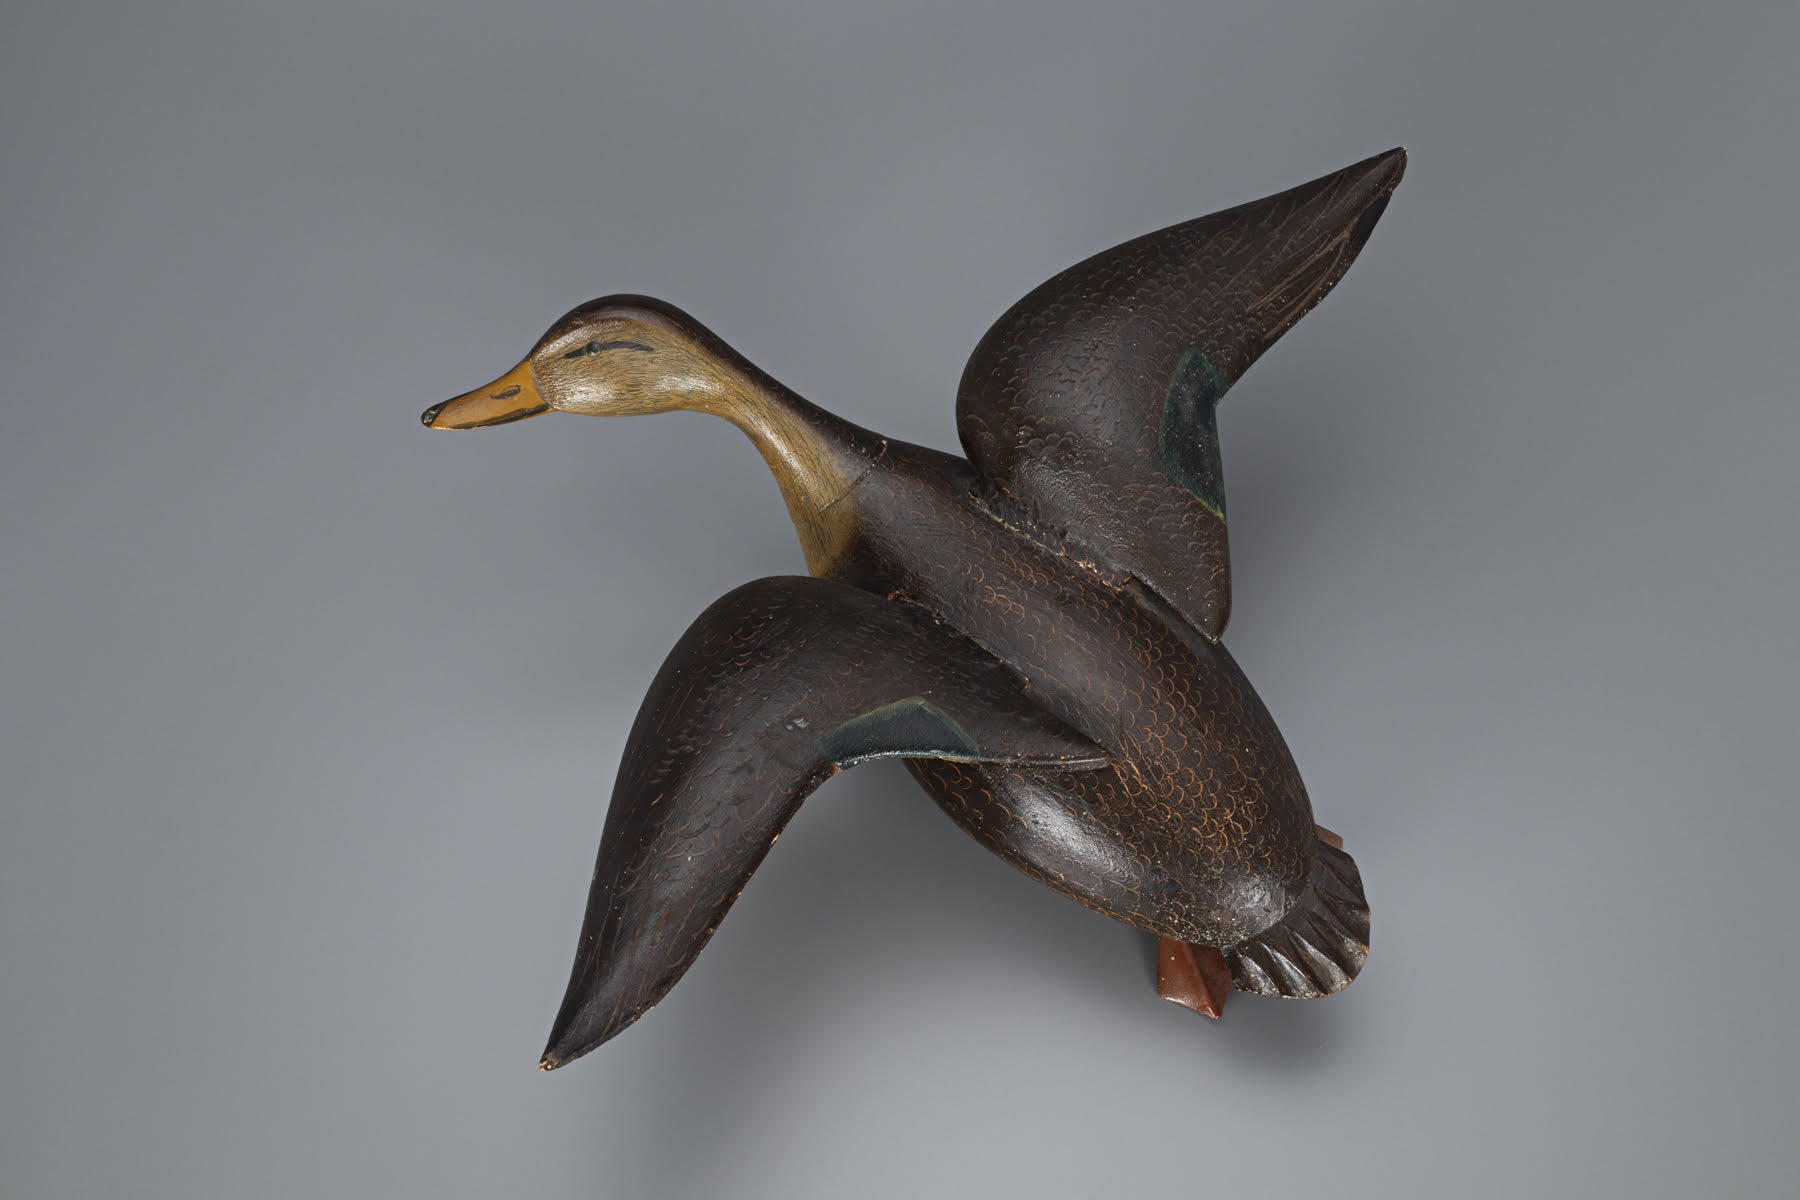 A decorative carving of a flying black duck, made by Ira Hudson in 1947. It faces left, its head in profile. The body is brown and its wings are spread. Its back is to us. A foot peeks out from under the tail.